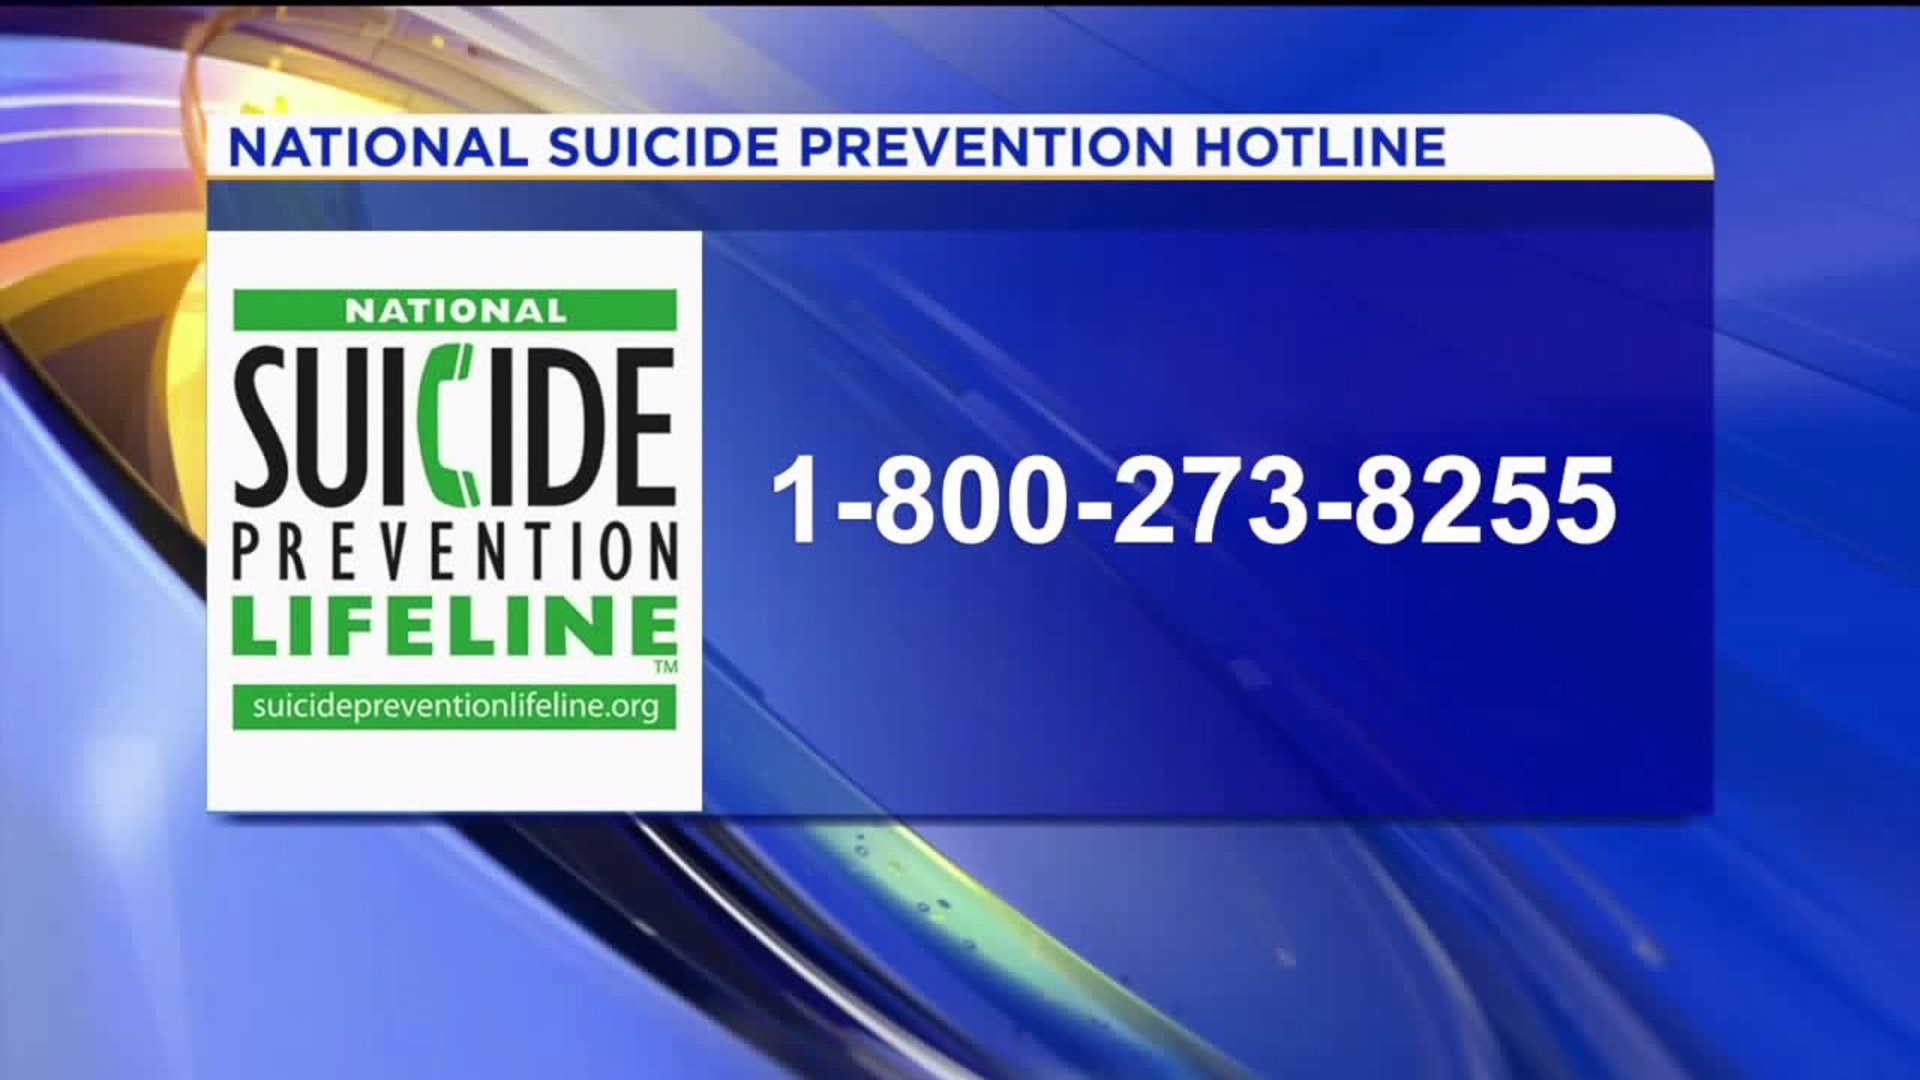 On Suicide, Scranton Counseling Center Offers Help